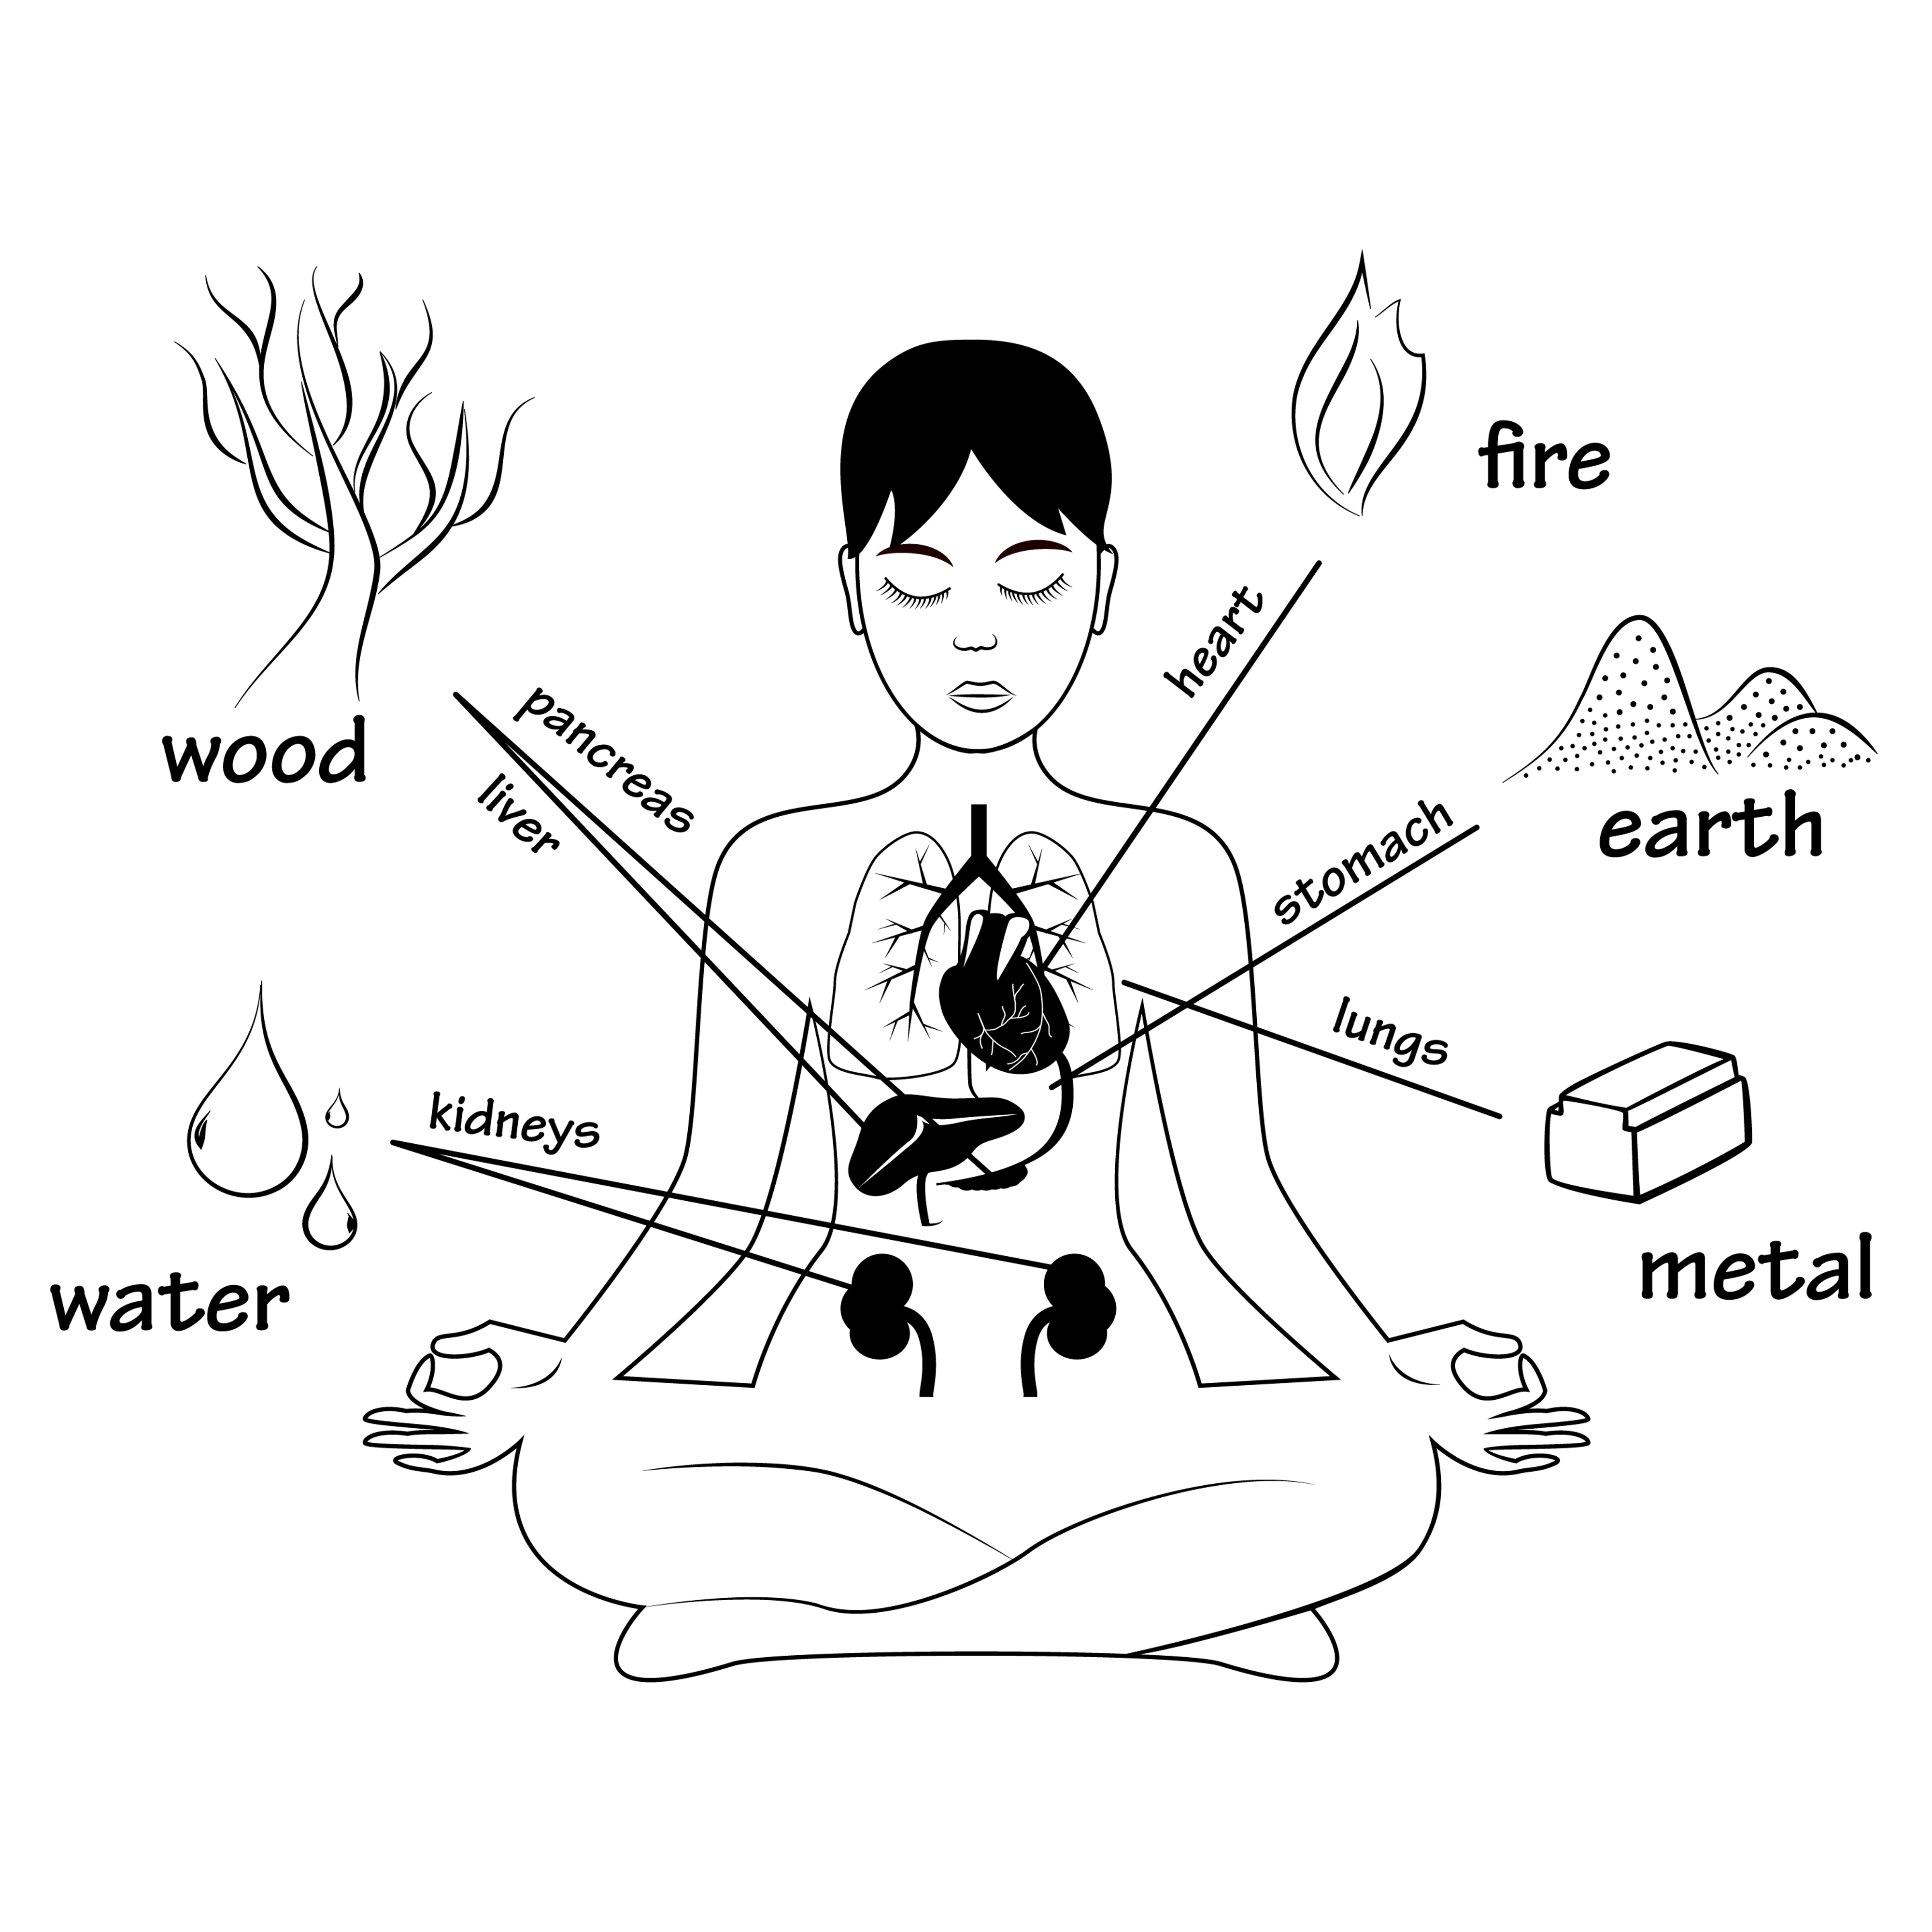 the 5 elements of TCM